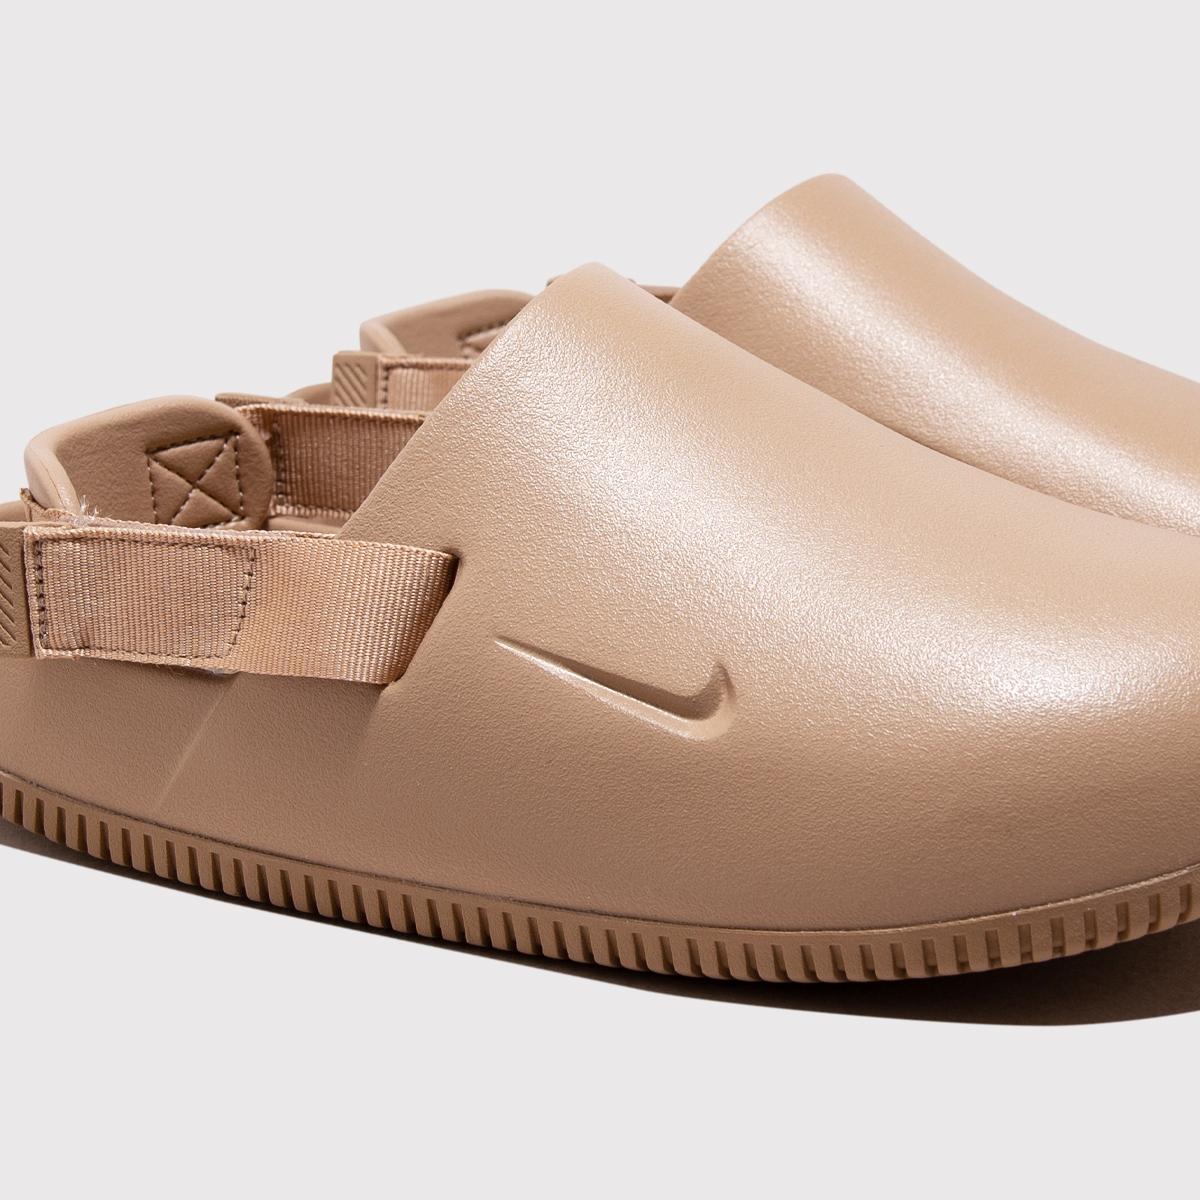 How Does the Nike Calm Slide Compare to the adidas Yeezy Slide?